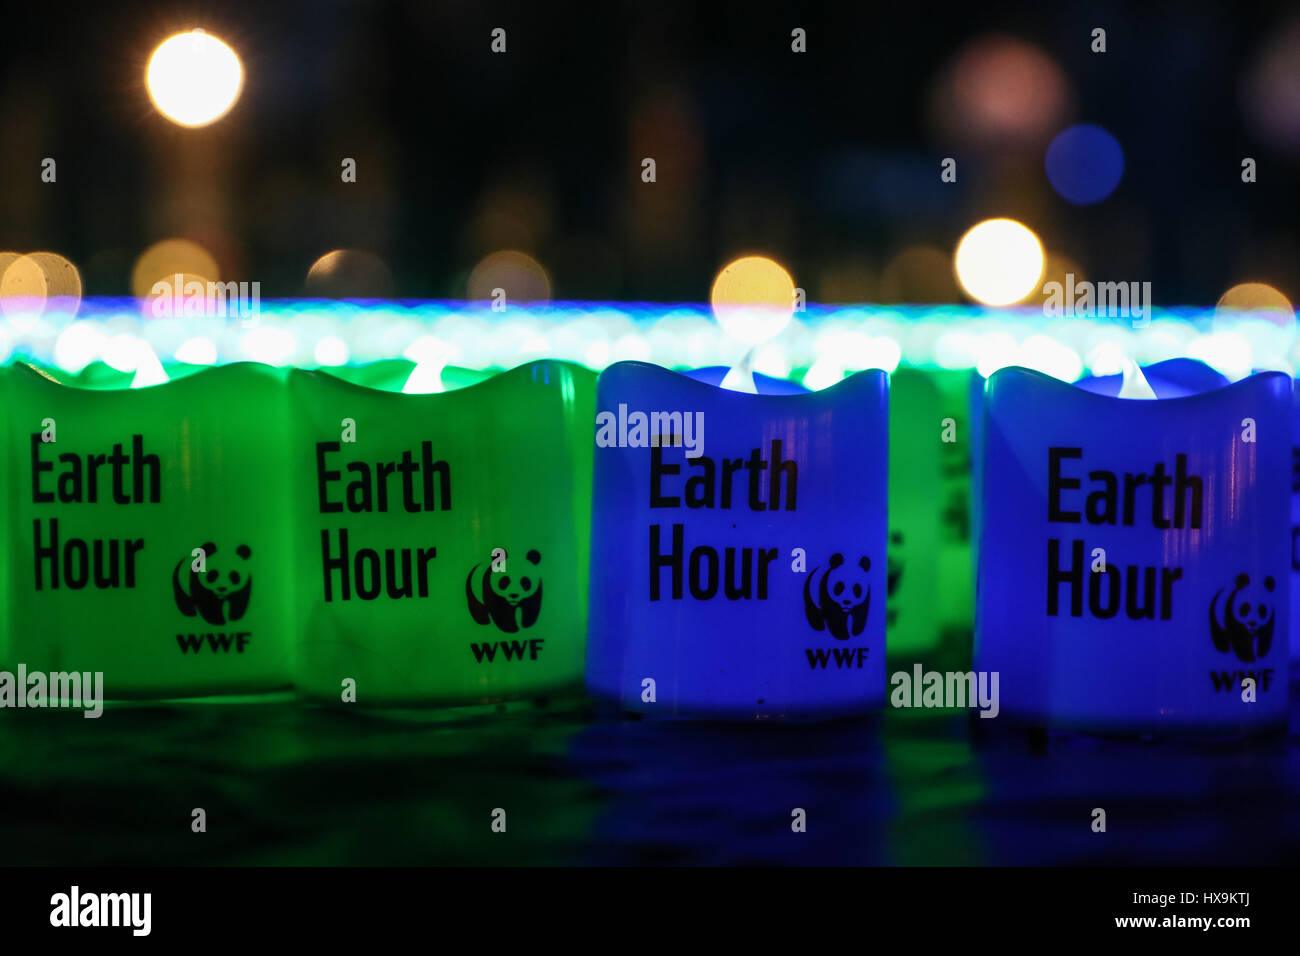 Berlin. 25th Mar, 2017. Photo taken on March 25, 2017 shows lights with words "Earth Hour" placed on the ground for the annual Earth Hour event in Berlin, capital of Germany. Credit: Shan Yuqi/Xinhua/Alamy Live News Stock Photo